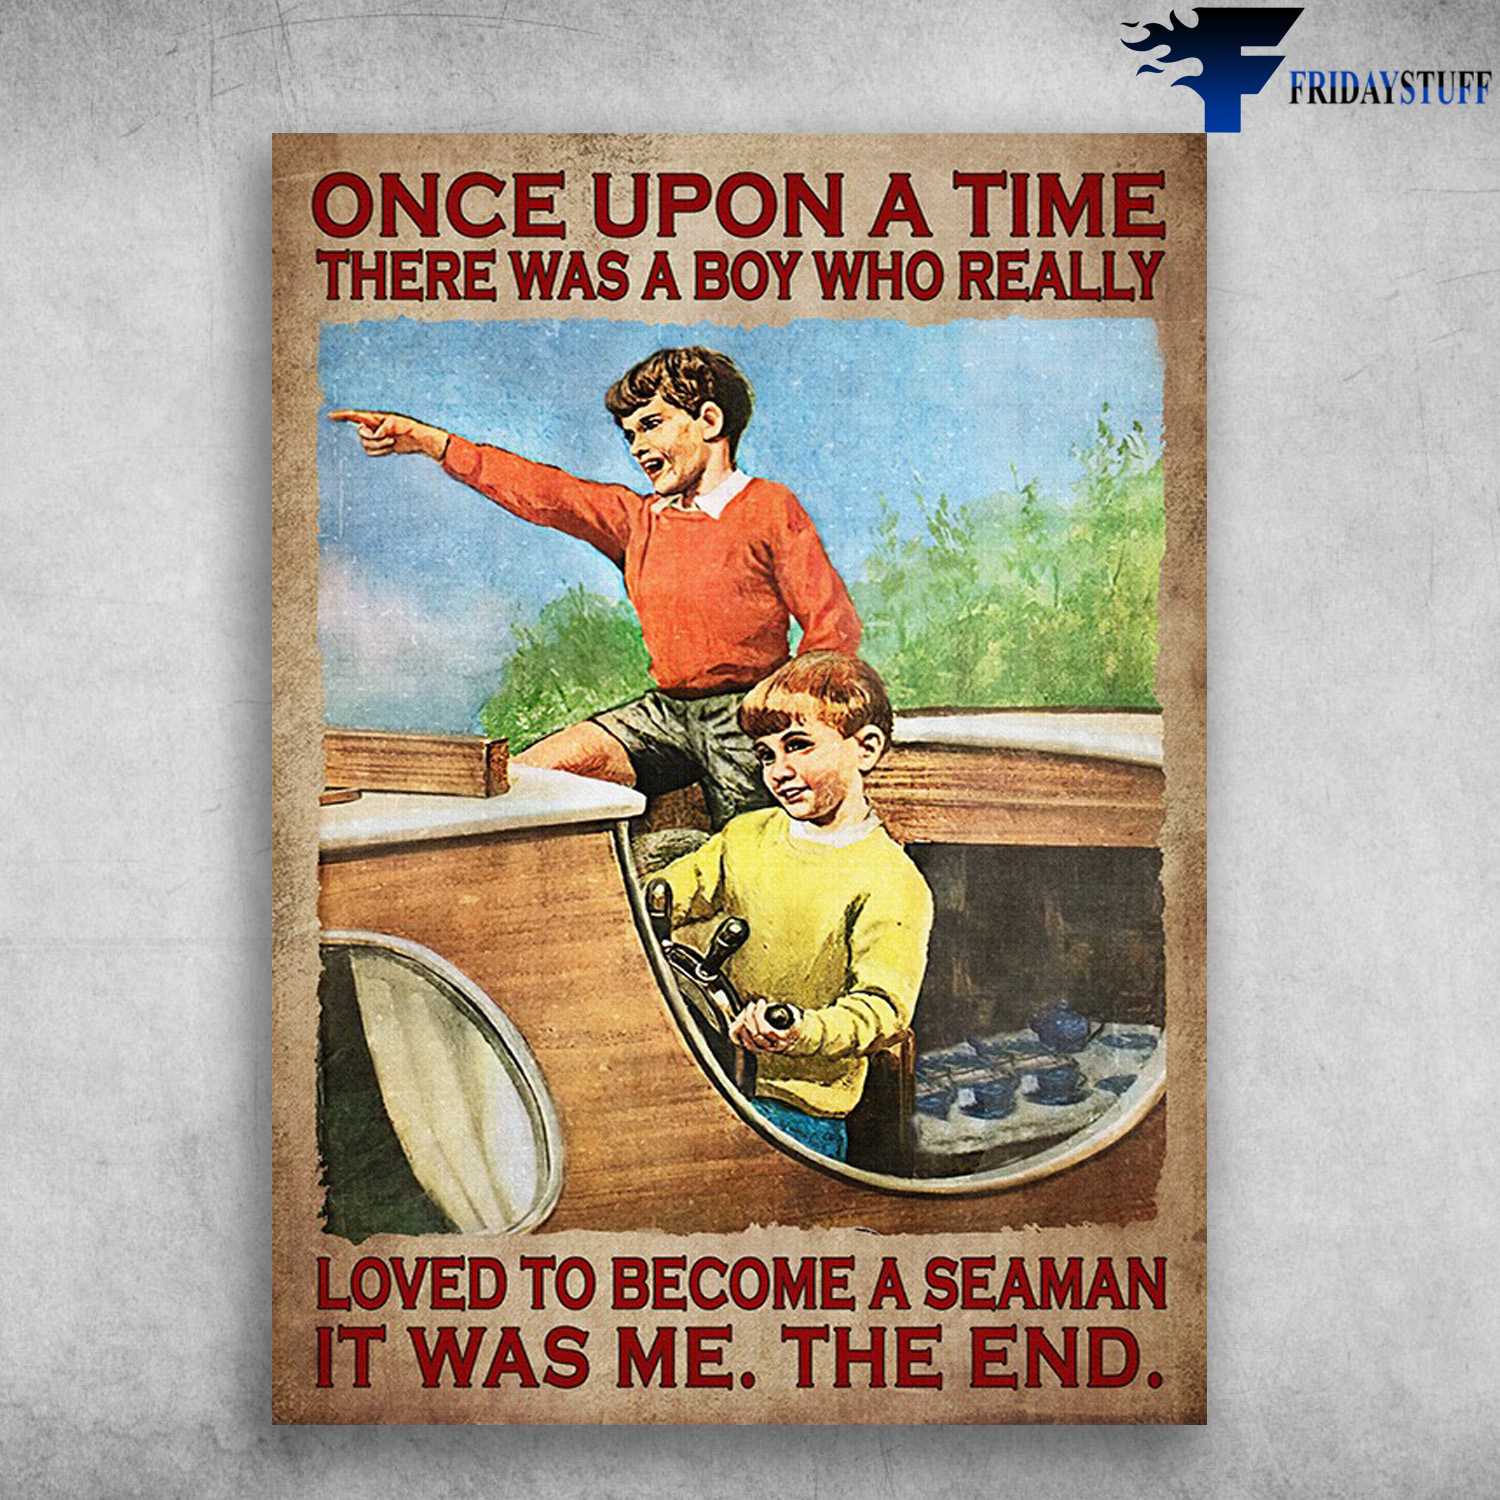 Seaman Poster, Sailor Boys - Oncer Upon A Time, There Was A Boy, Who Really Loved To Become A Seaman, It Was Me, The End